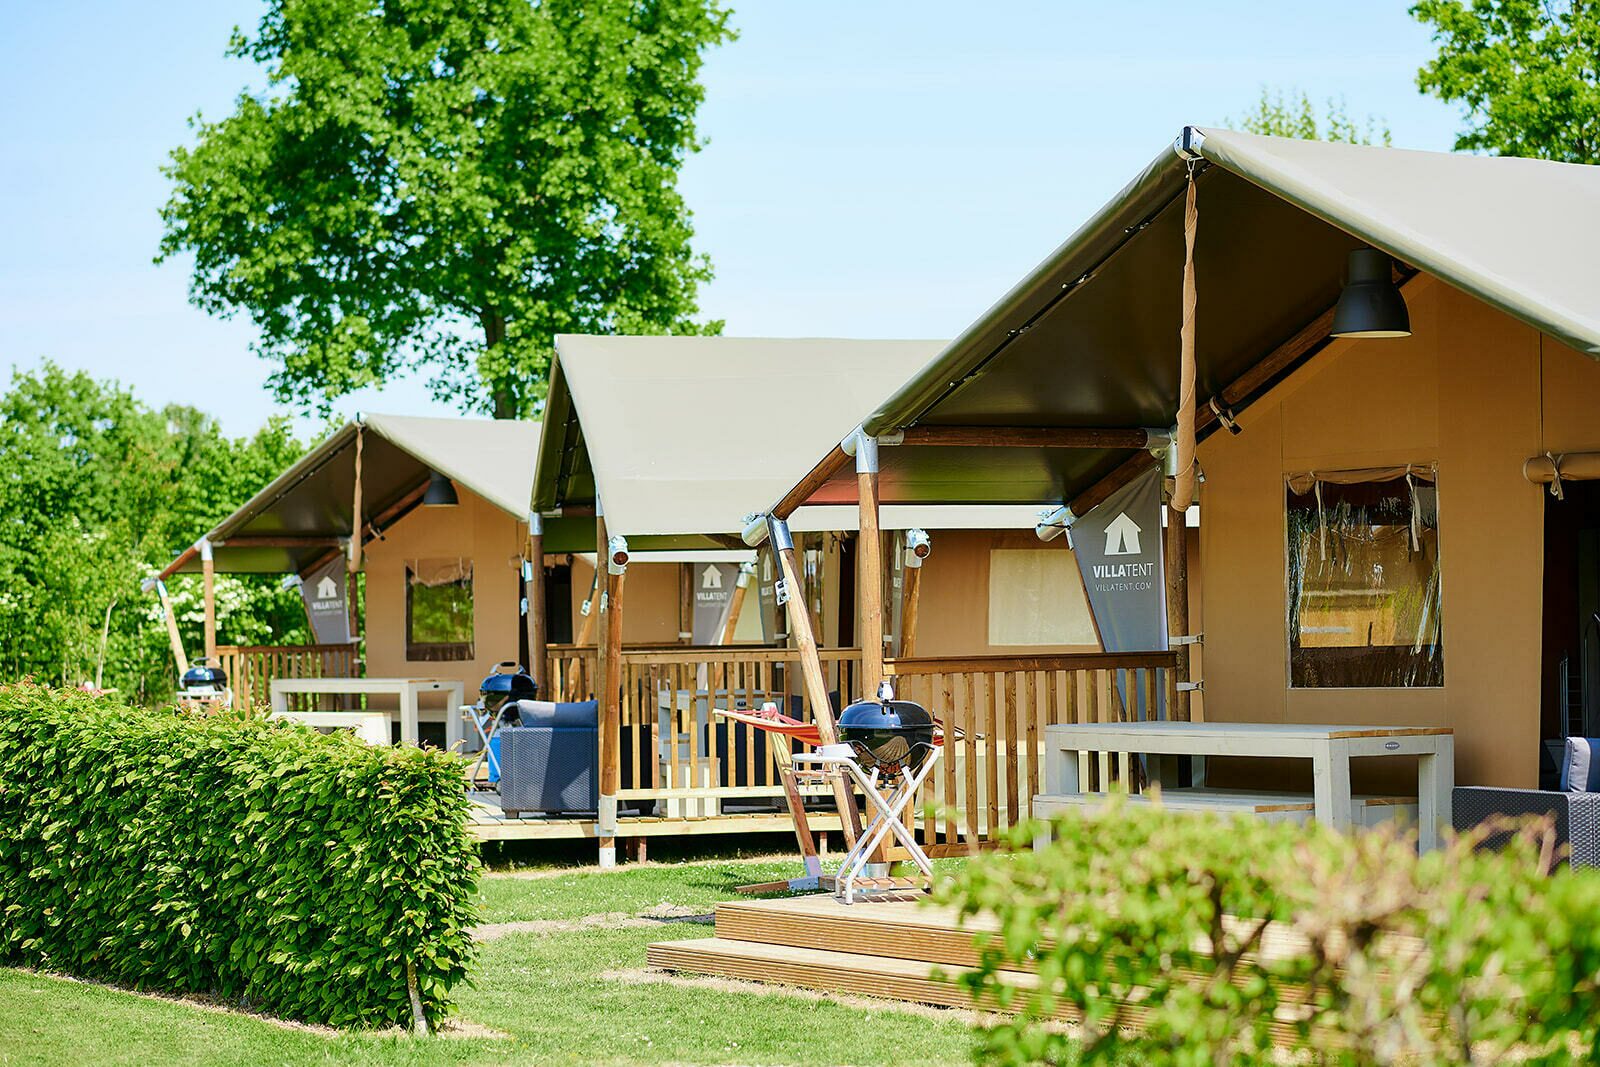 Camping Betuwestrand |  Villatent Nomad | 6 pers.